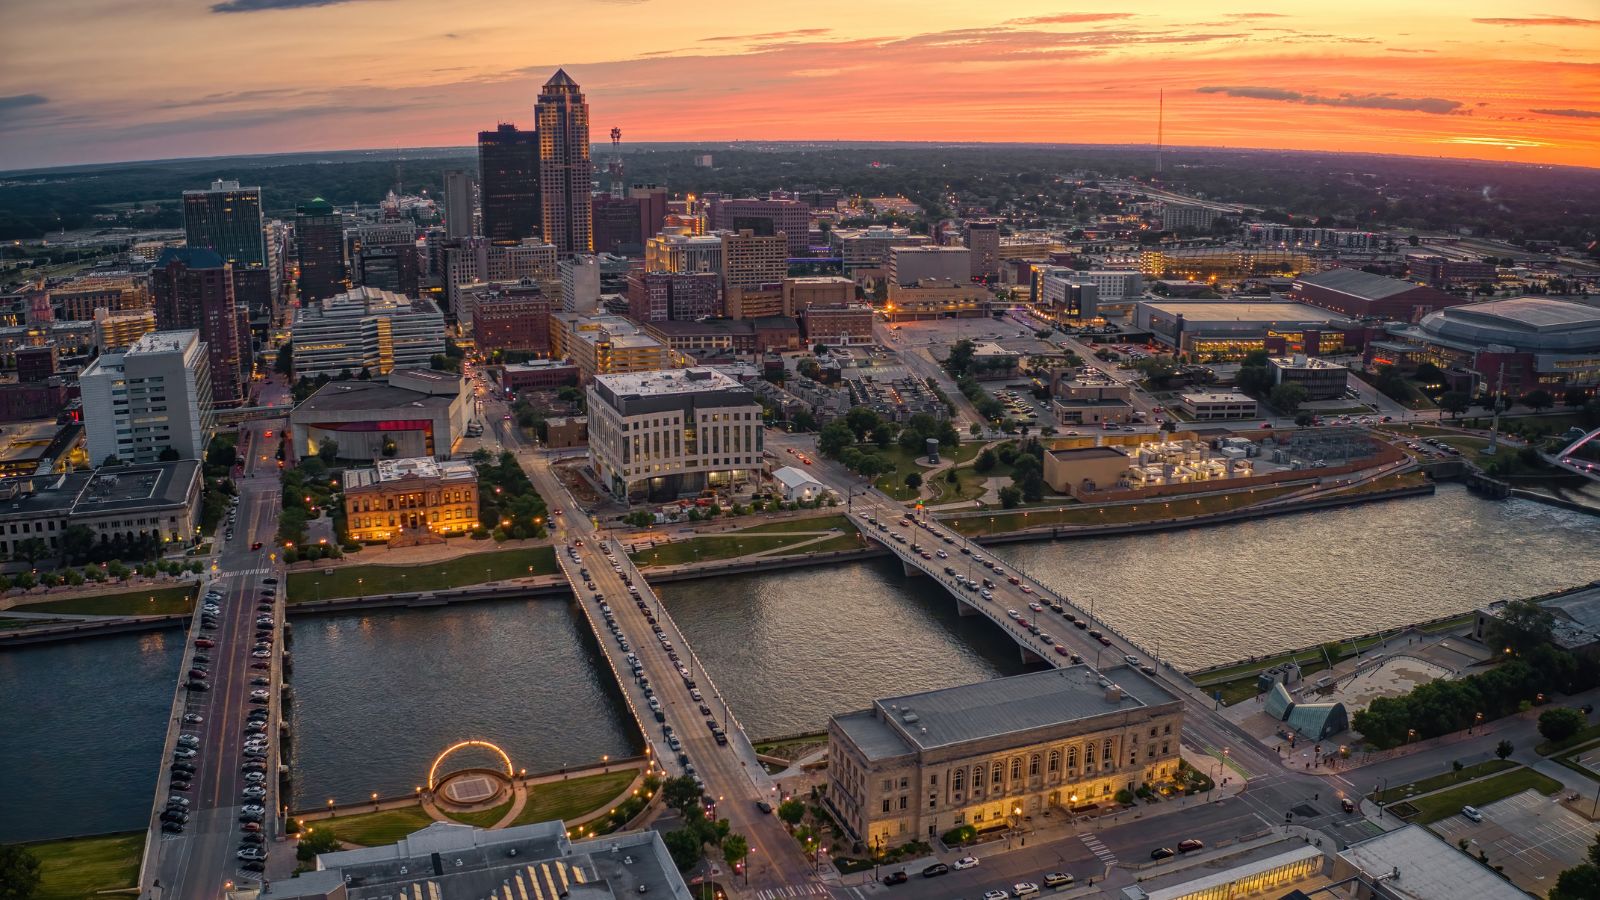 <p>If you still want to live in a big city then you can do so in Des Moines, just with more affordable living. It has an incredible culture with an outdoor sculpture park and botanical gardens. There are also plenty of healthcare facilities that focus on being more age-related.</p>